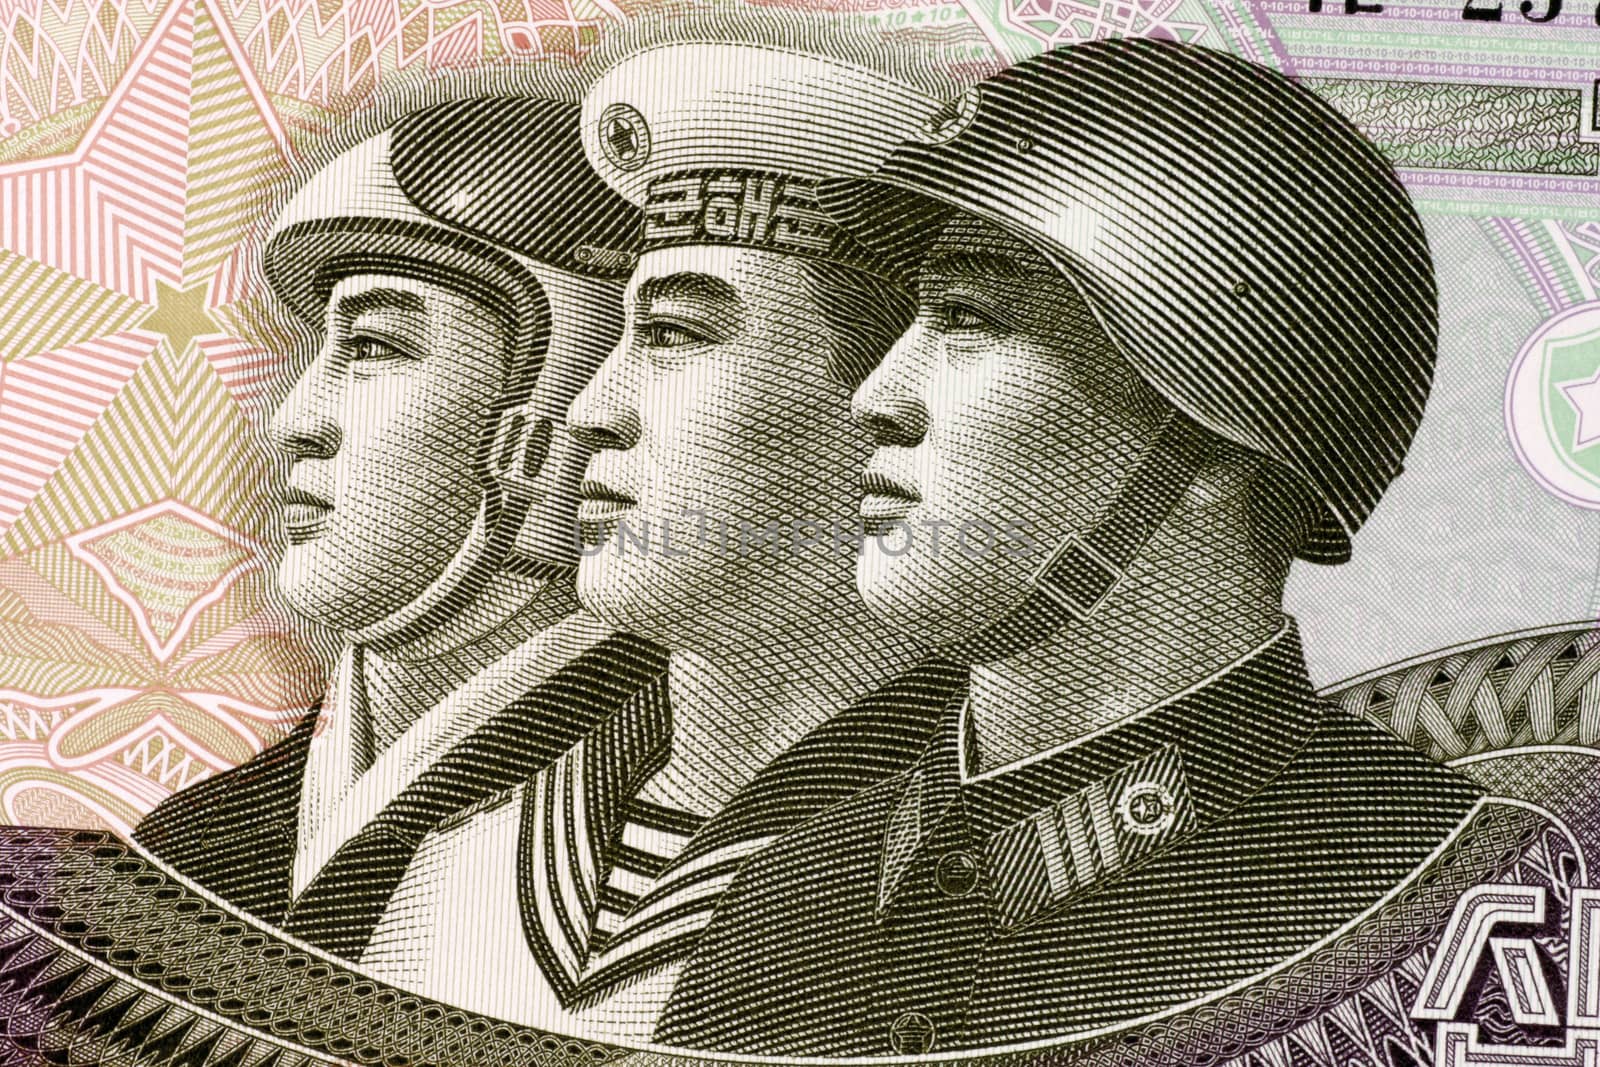 Armed Forces on 10 Won 2002 Banknote from North Korea.